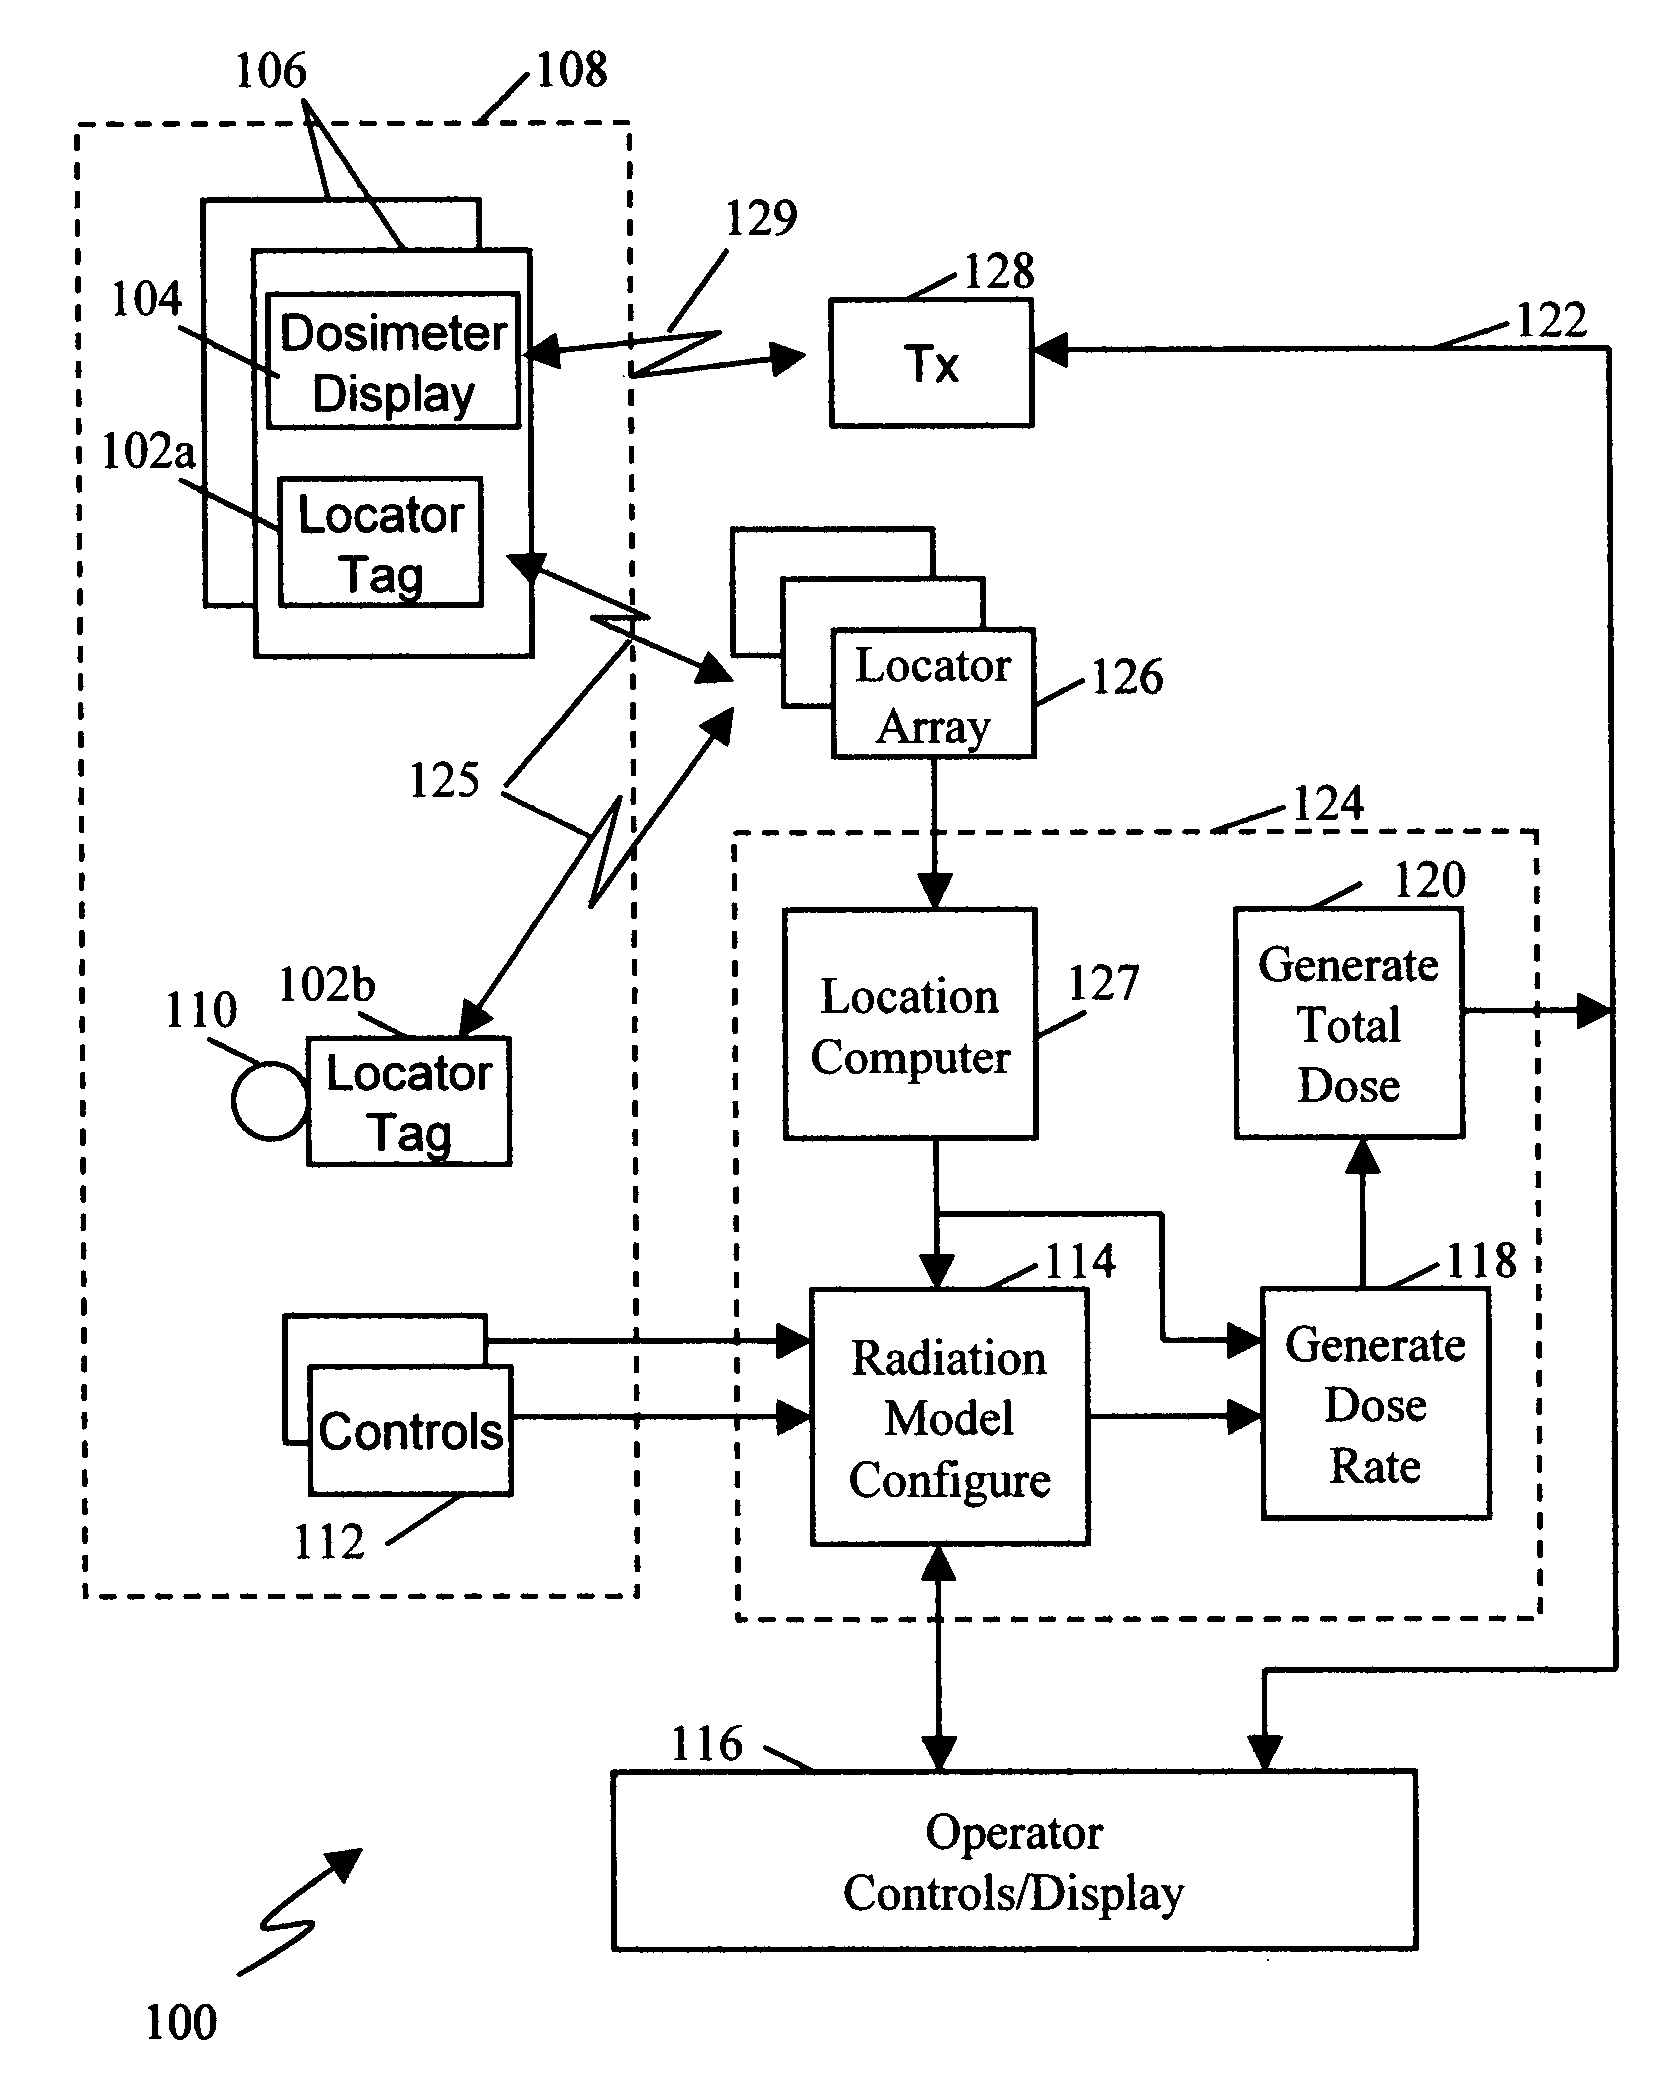 System and method for simulated dosimetry using a real time locating system